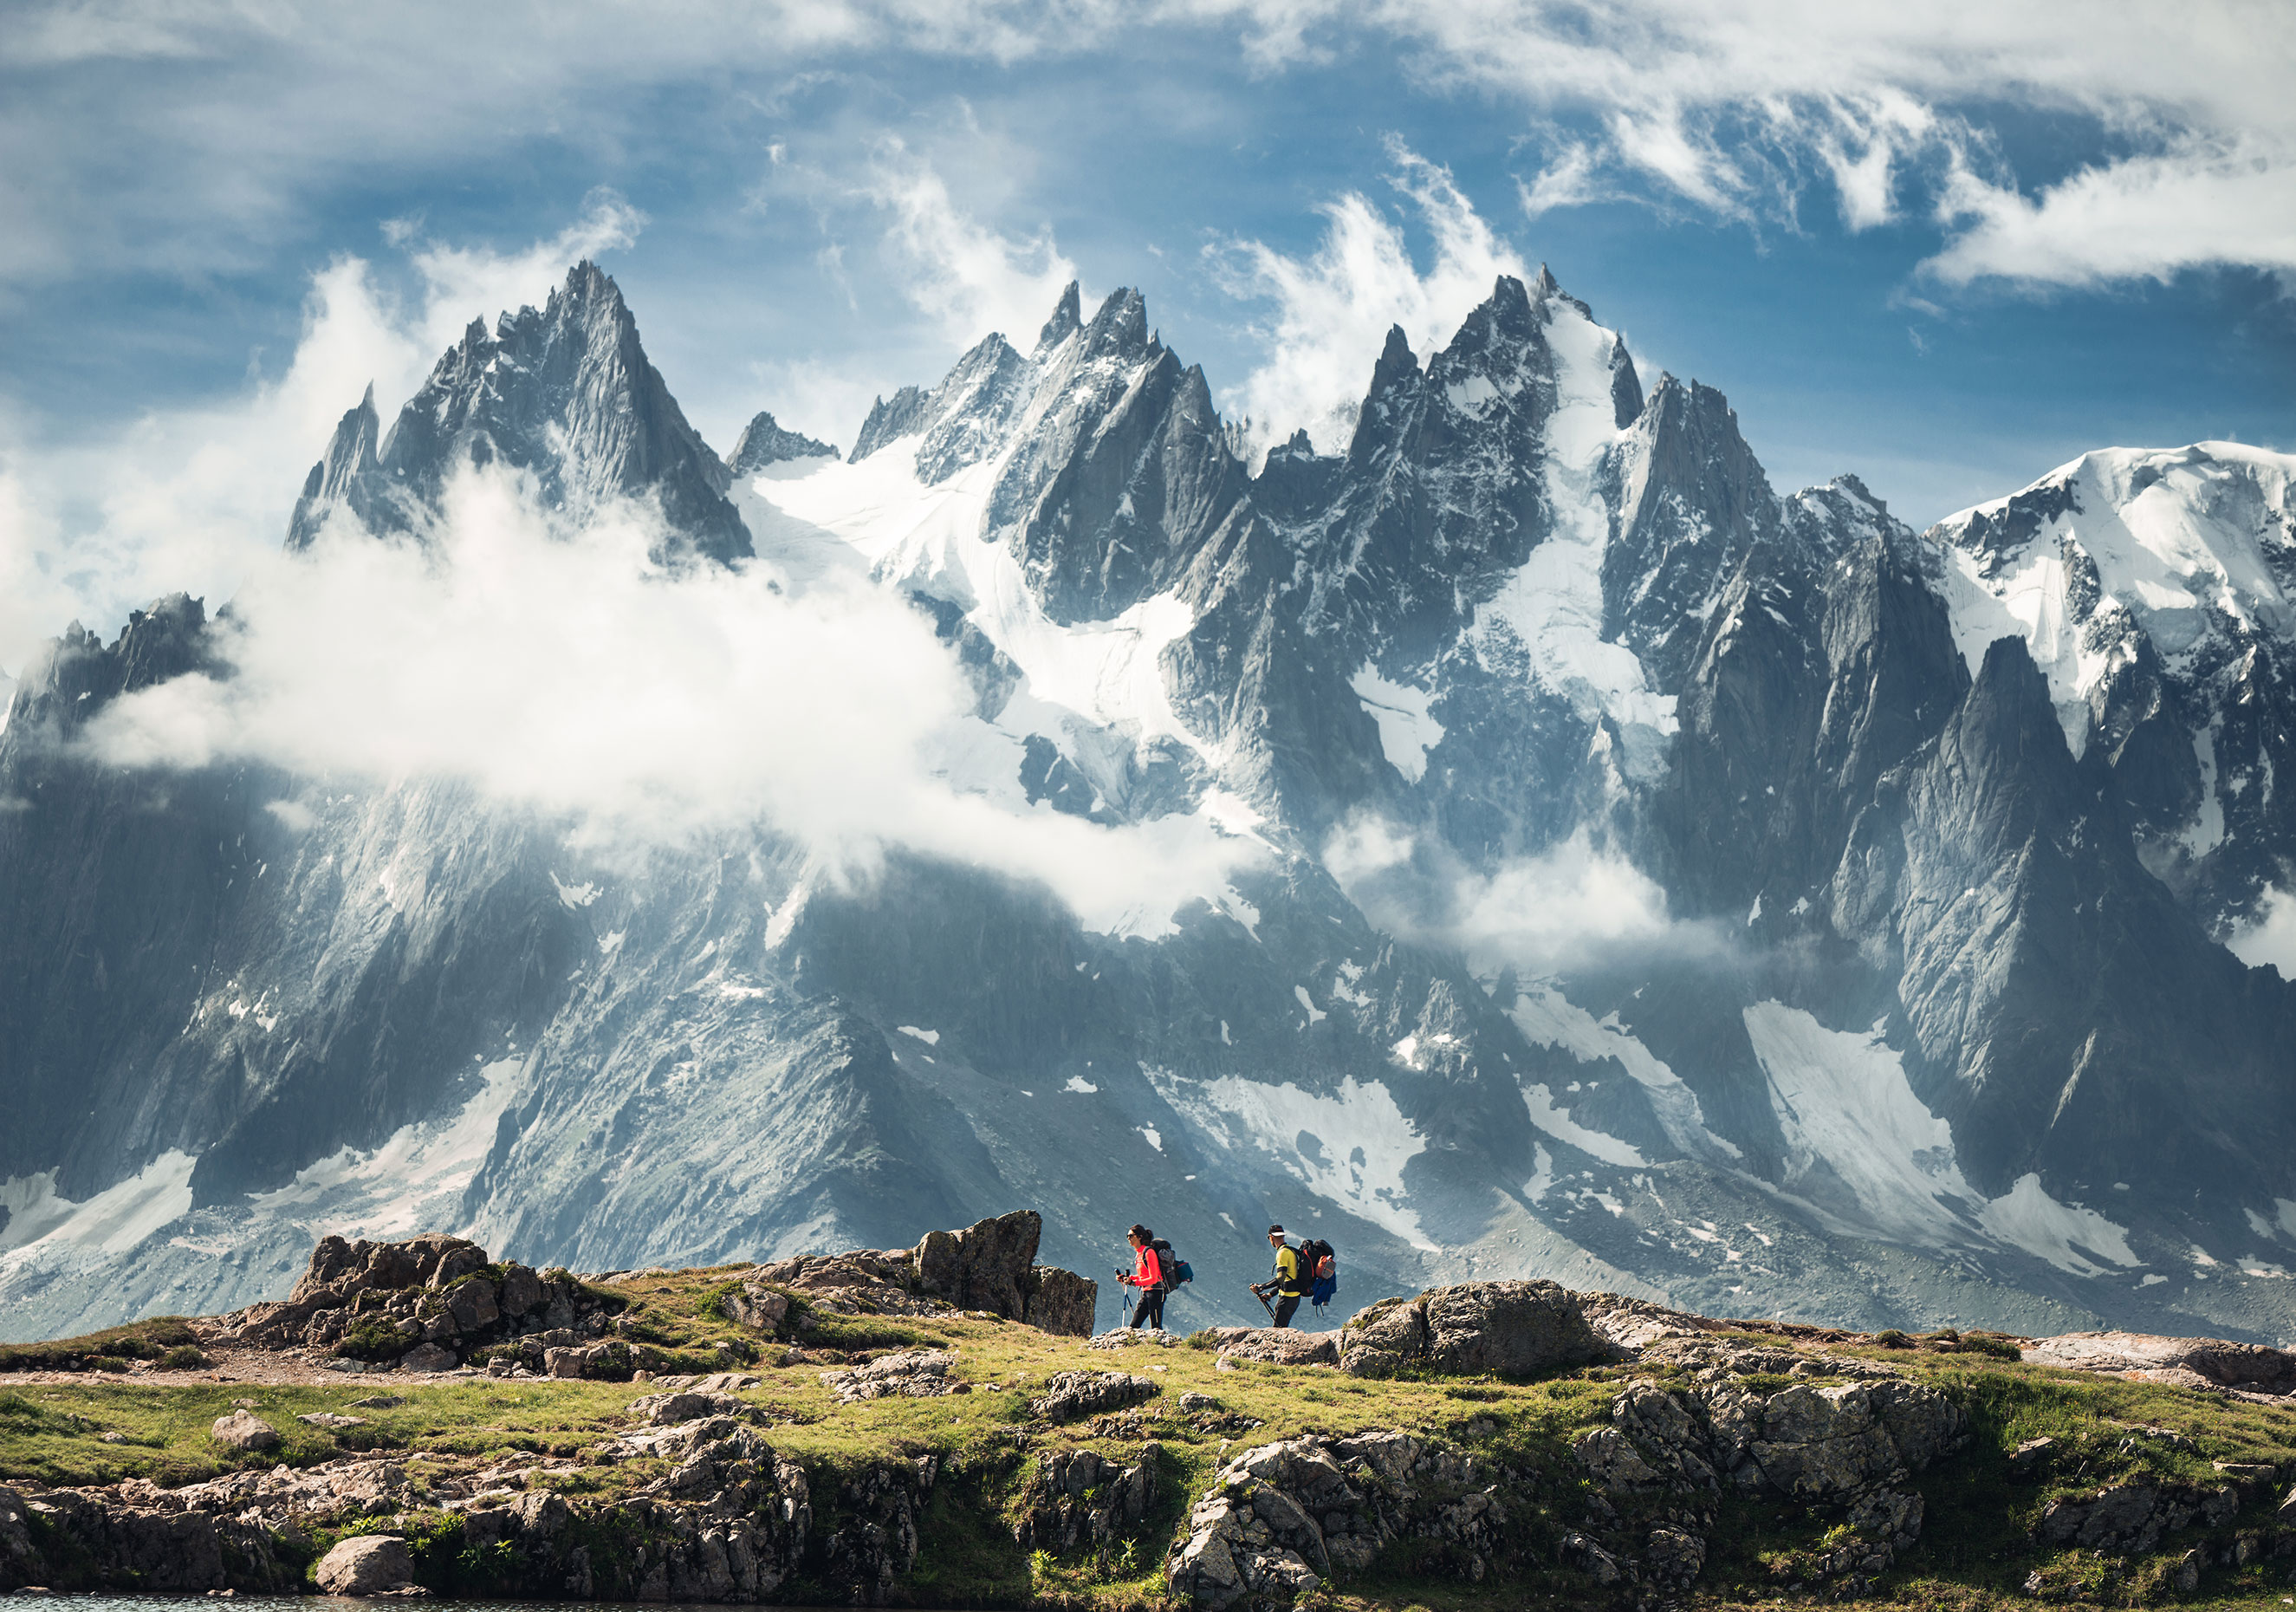 8 best tips for mountain photography - Photography - Inspiration ...